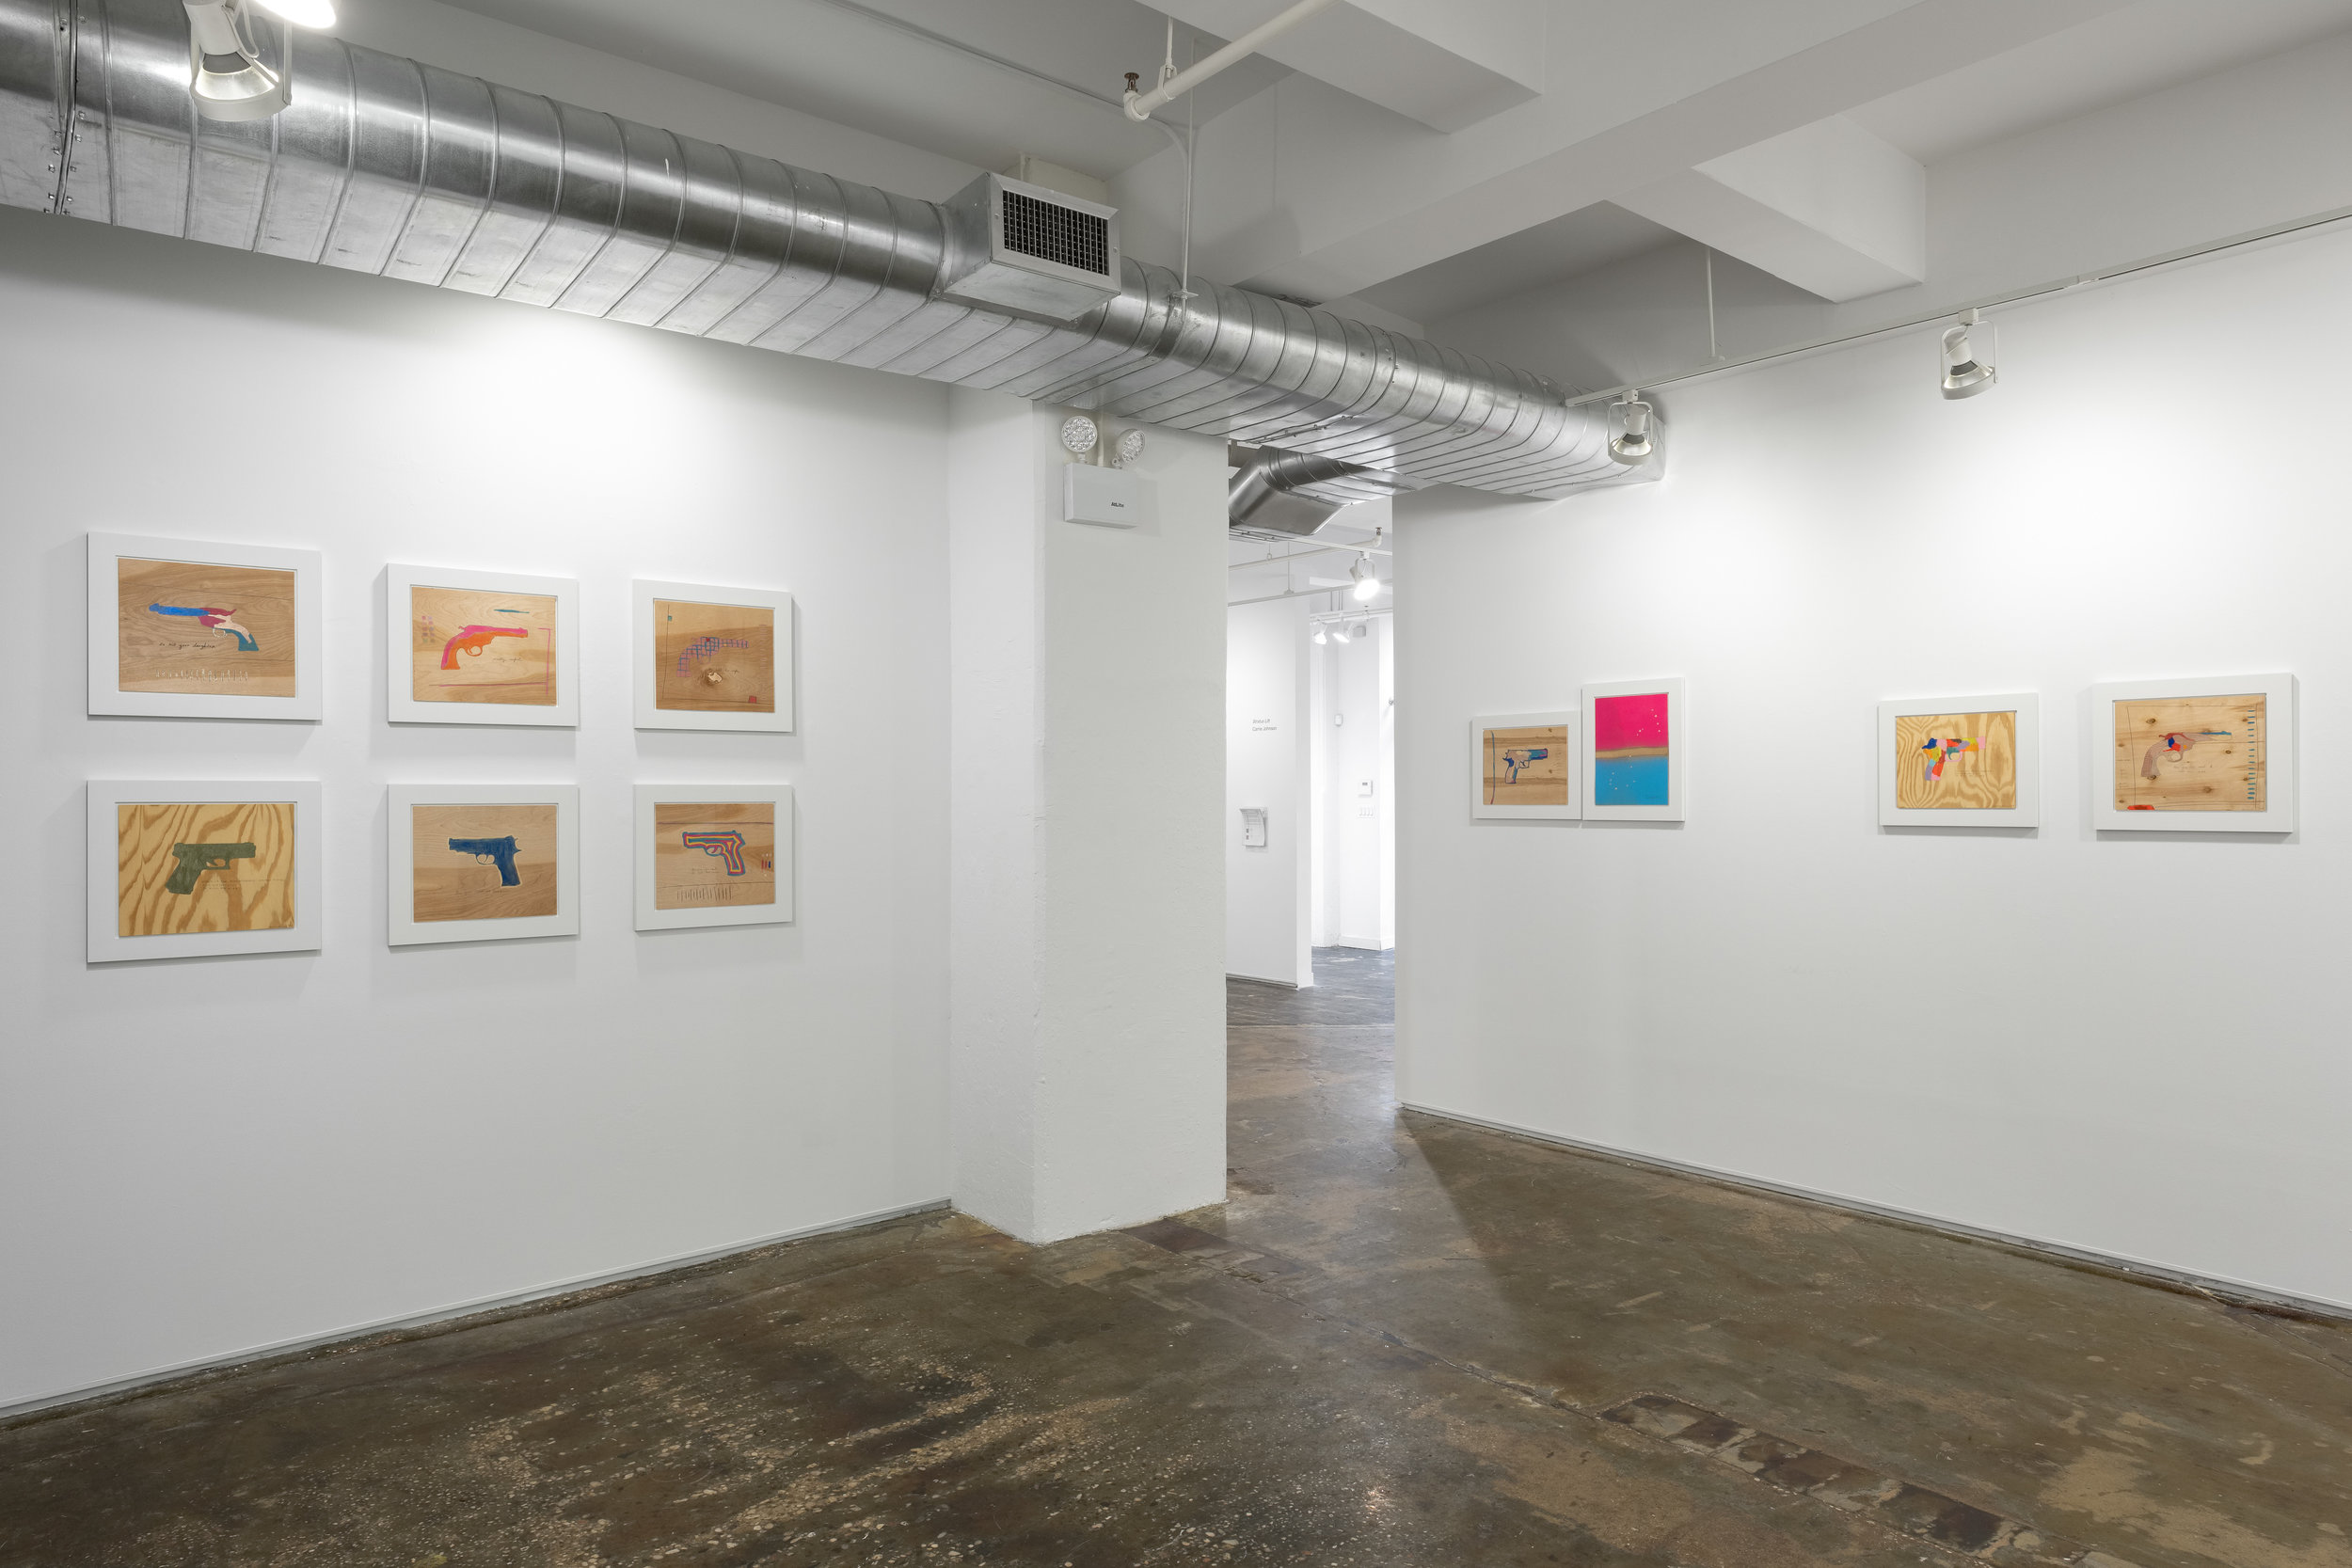  Installation view of  Every 16 Hours  